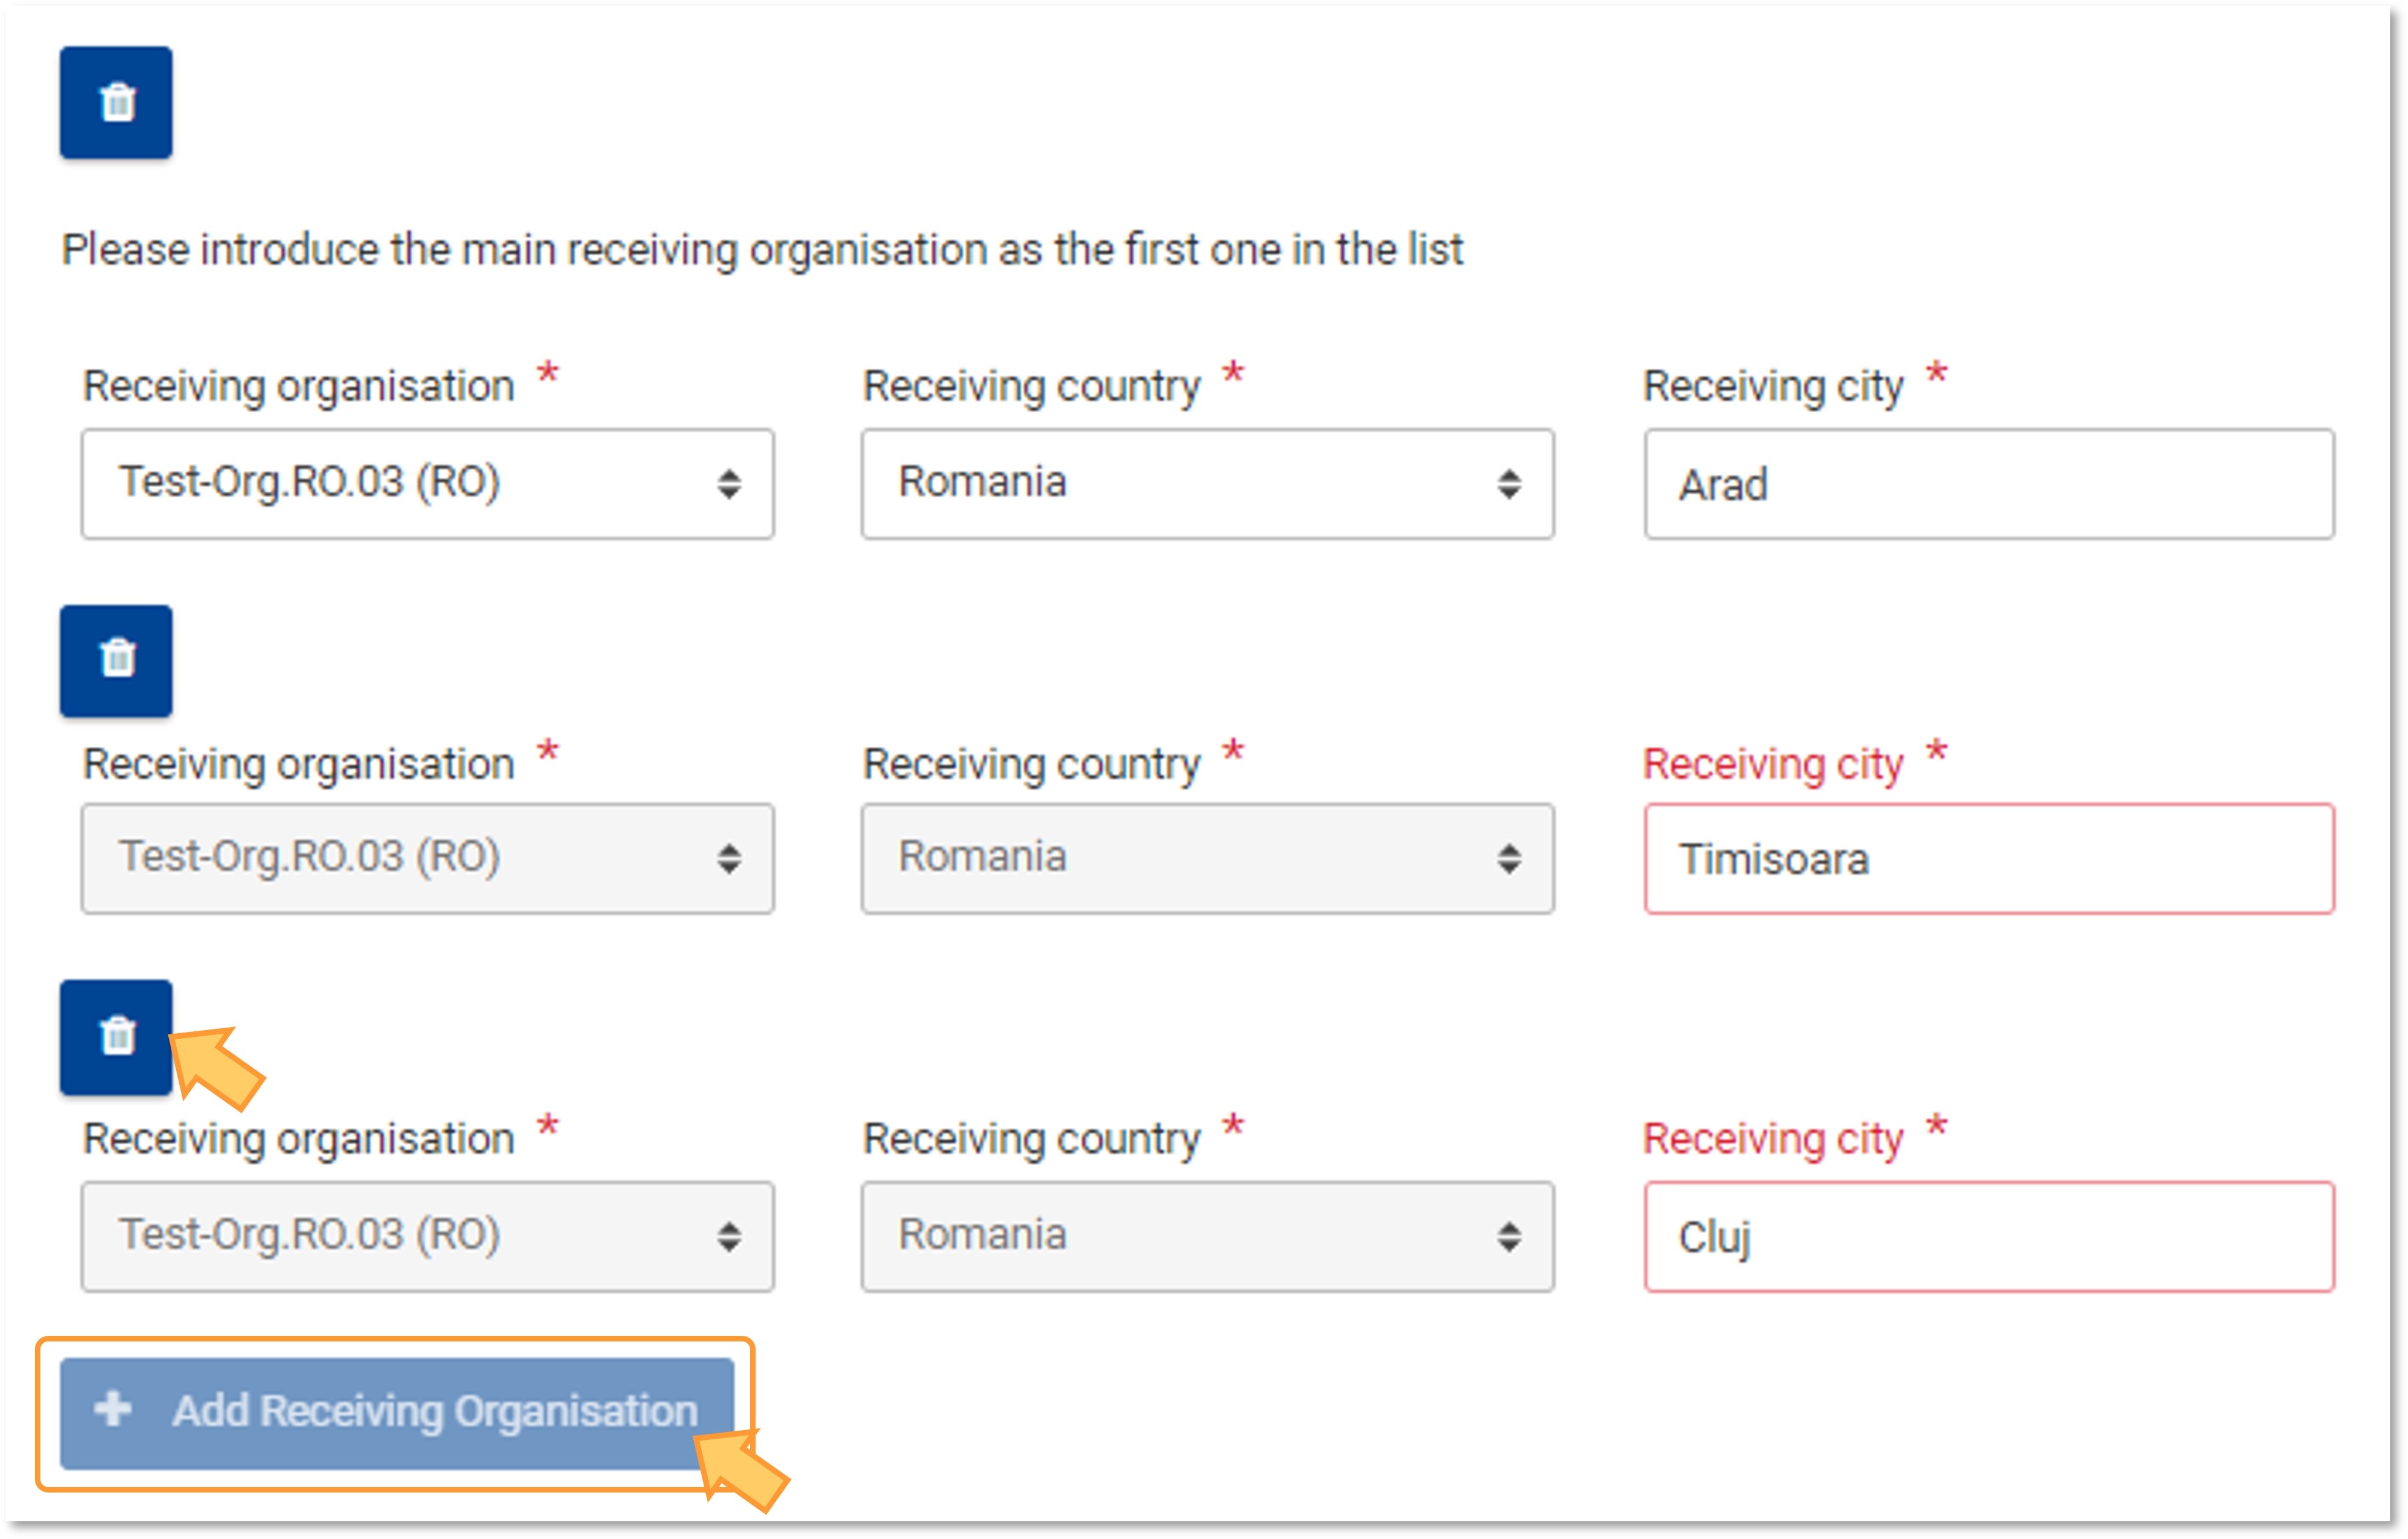 A maximum of three locations can be added for the receiving organisation